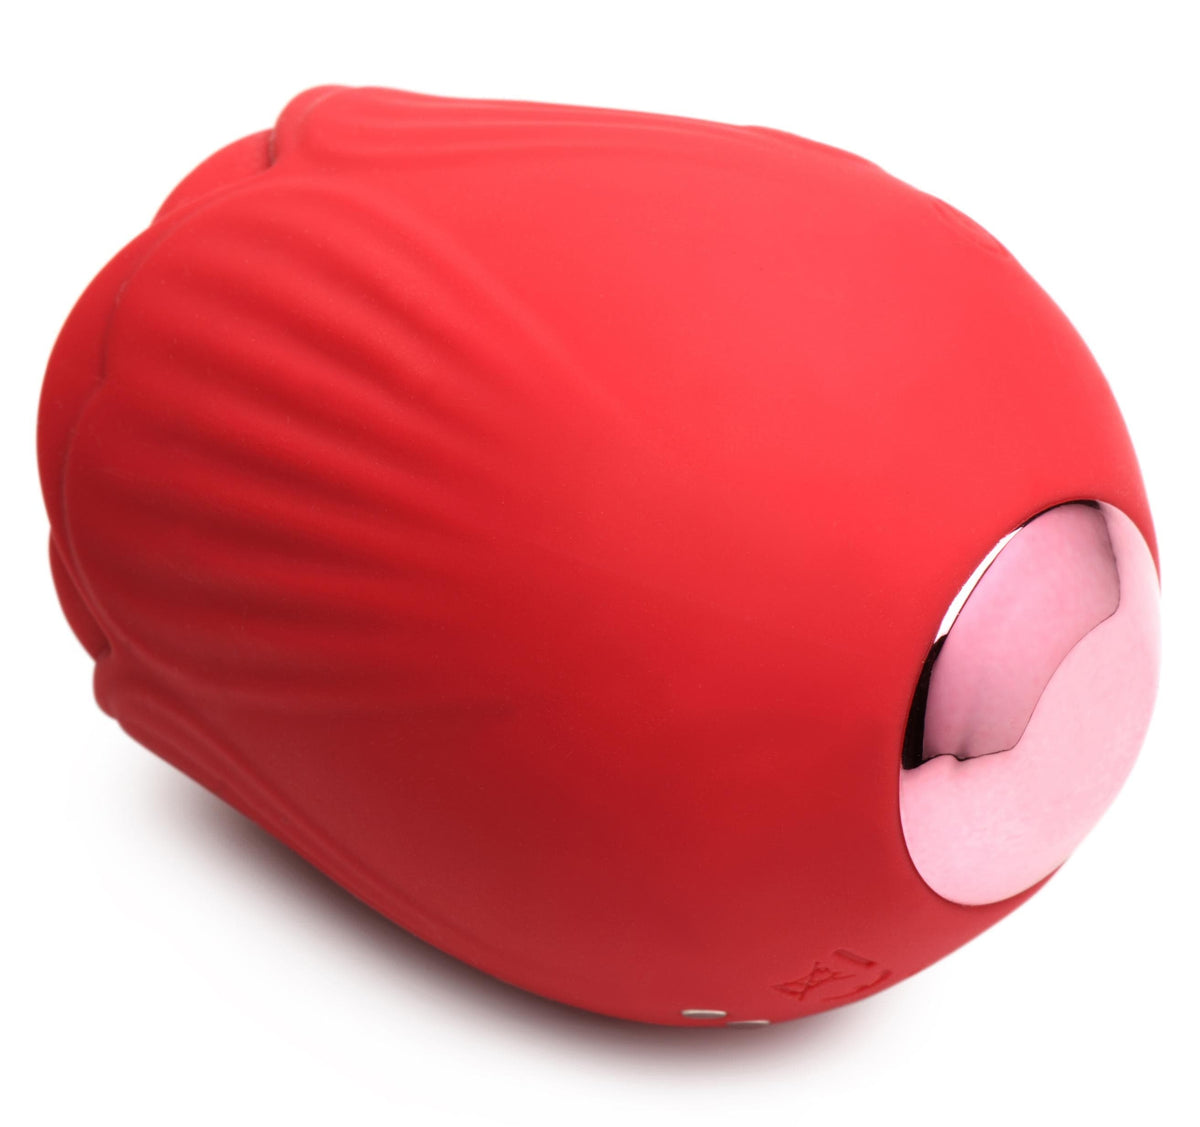 bloomgasm french rose licking and vibrating stimulator red